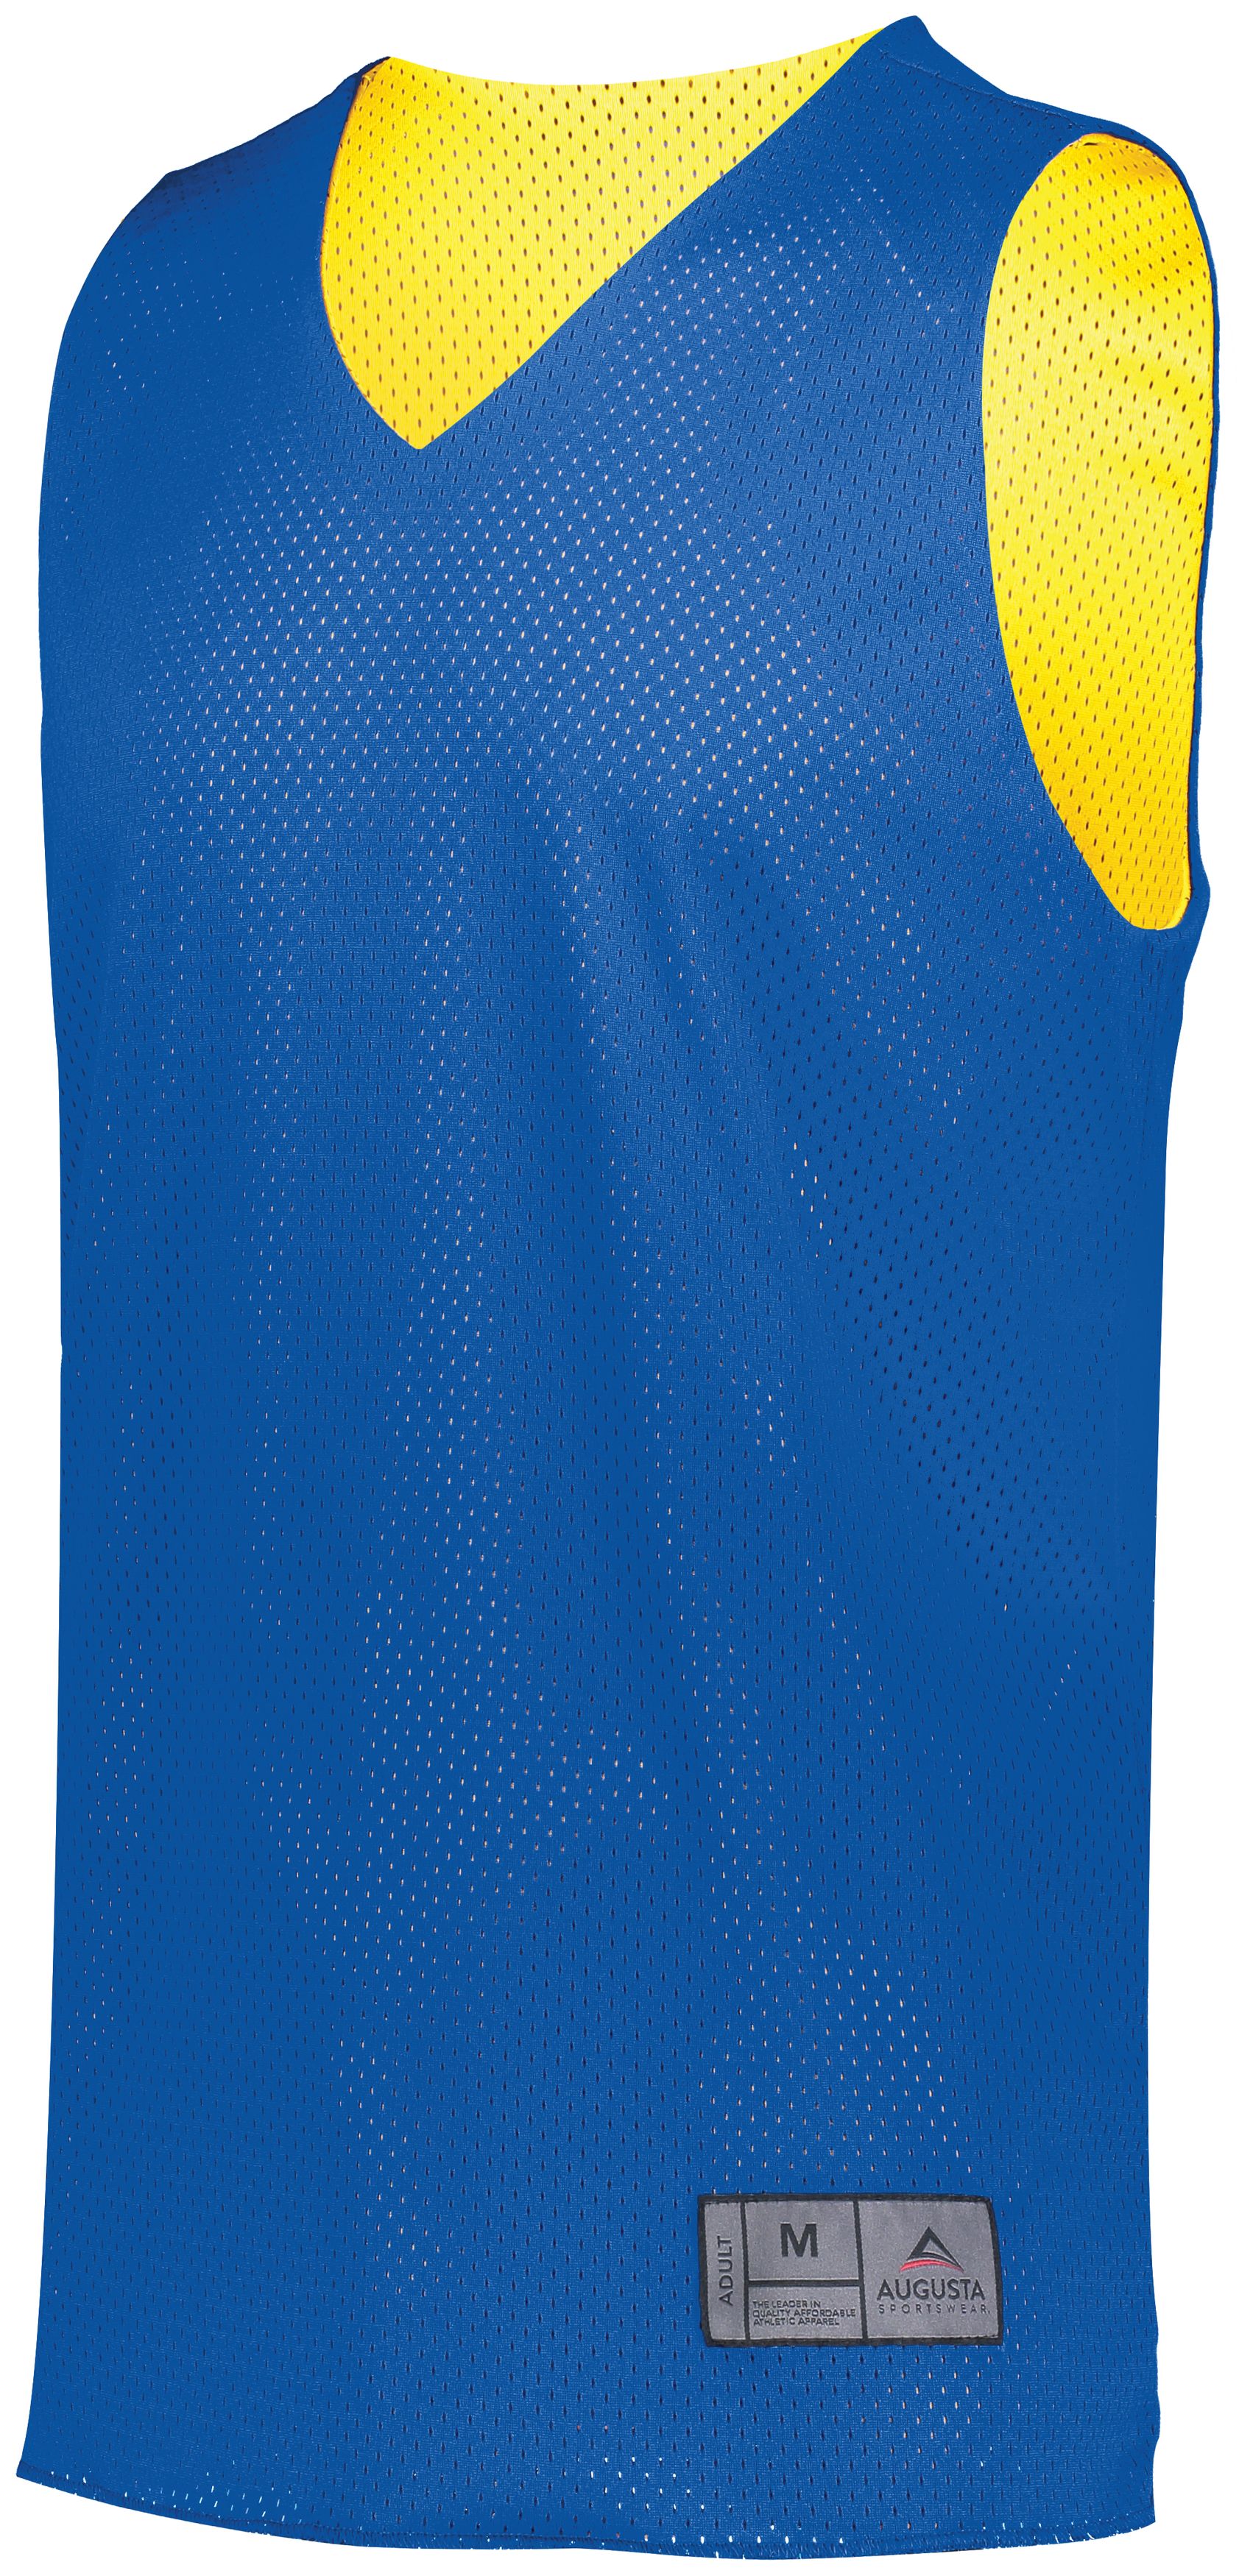 What is Quality Blank Basketball Vest Uniform Design Template Mesh Basketball  Jersey